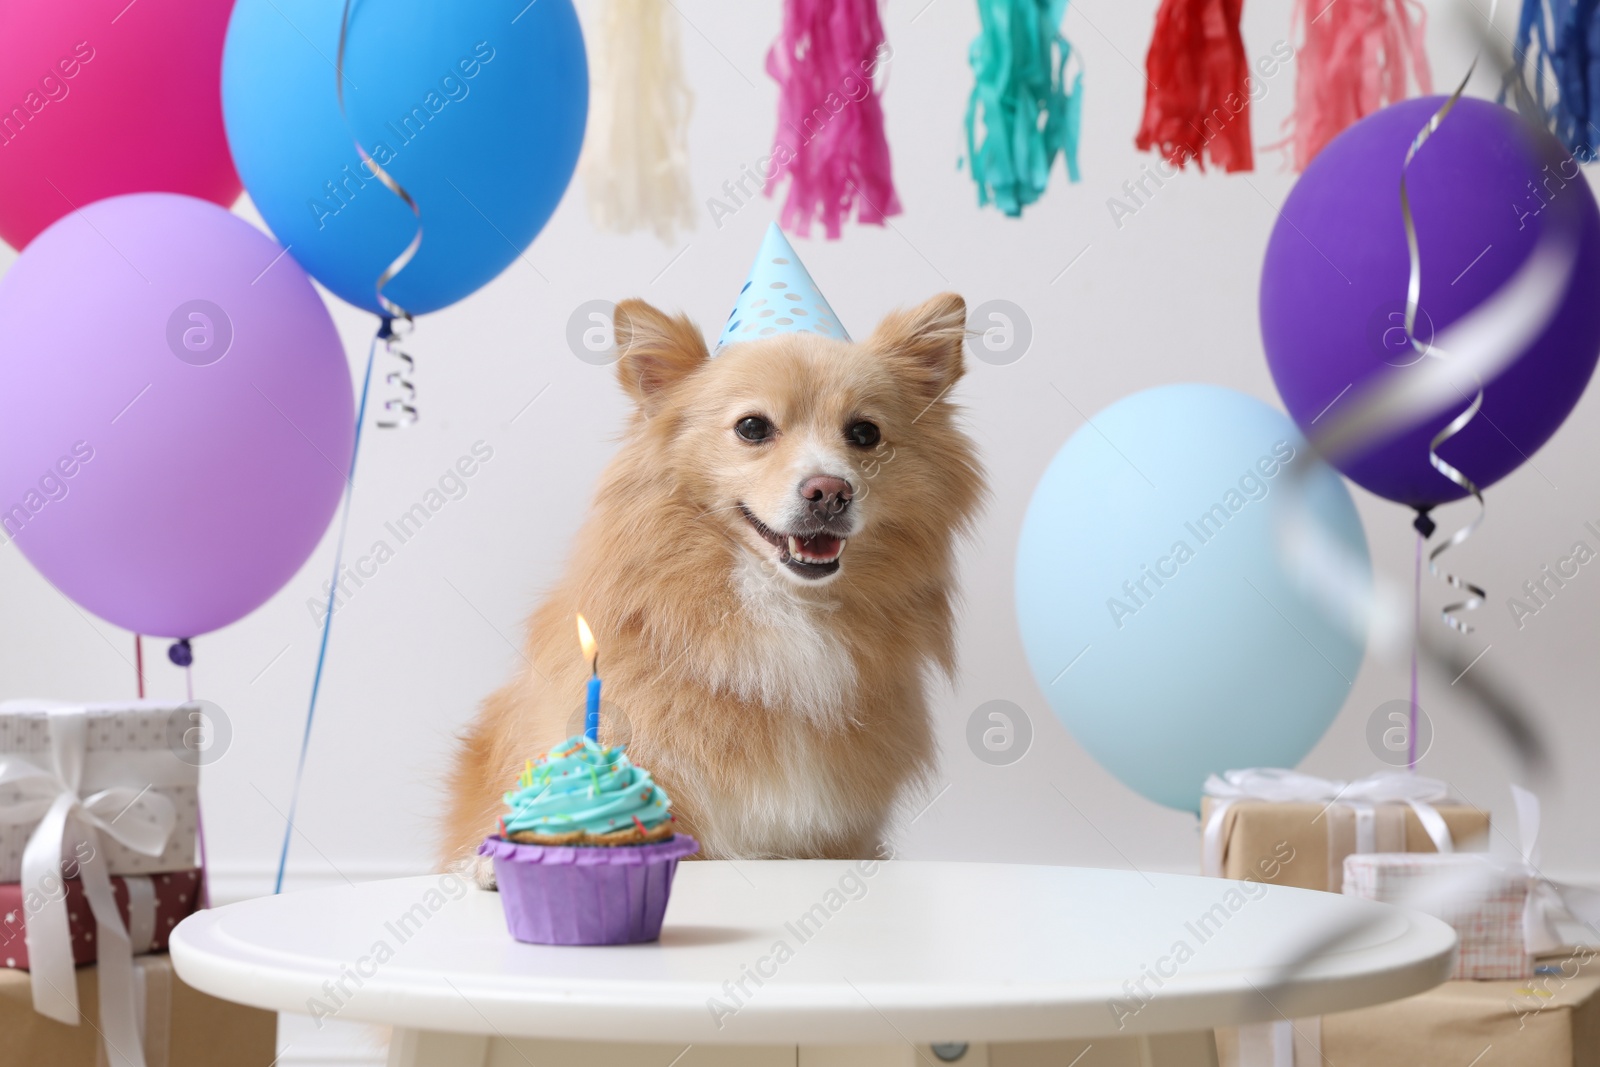 Photo of Cute dog wearing party hat at table with delicious birthday cupcake in decorated room